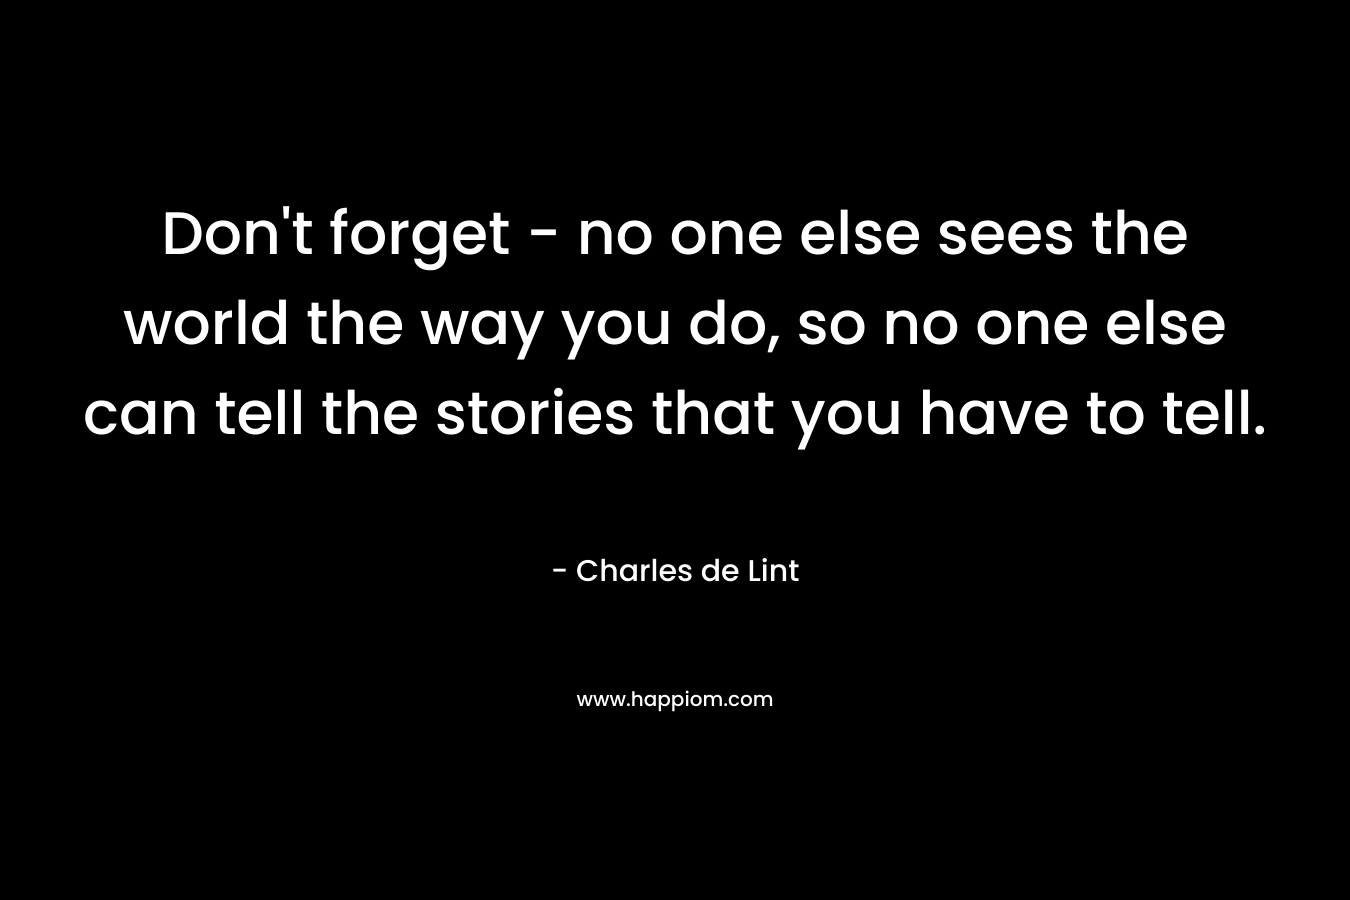 Don’t forget – no one else sees the world the way you do, so no one else can tell the stories that you have to tell. – Charles de Lint